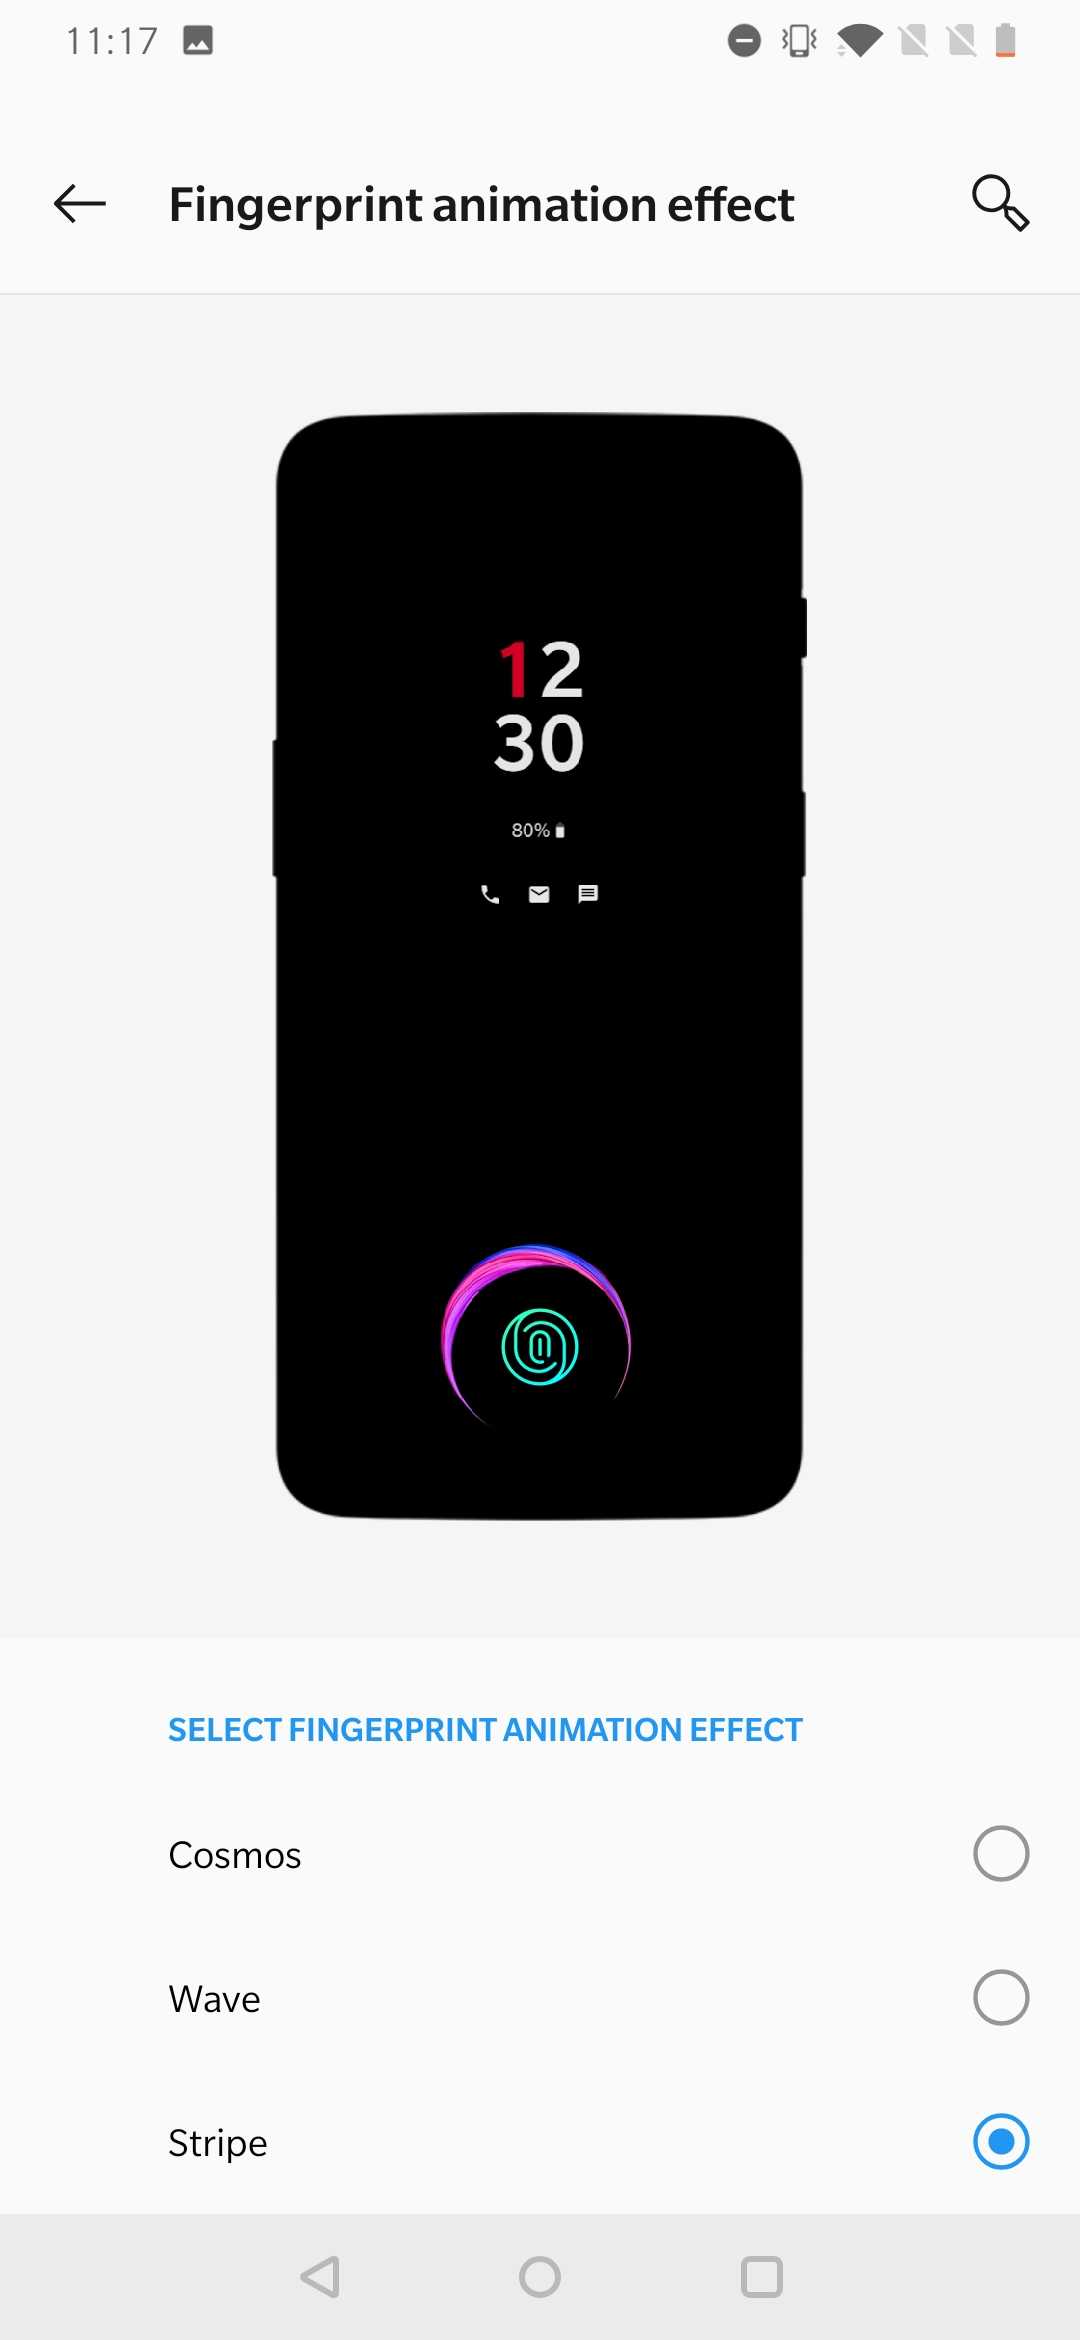 A fingerprint animation for the OnePlus 6T.